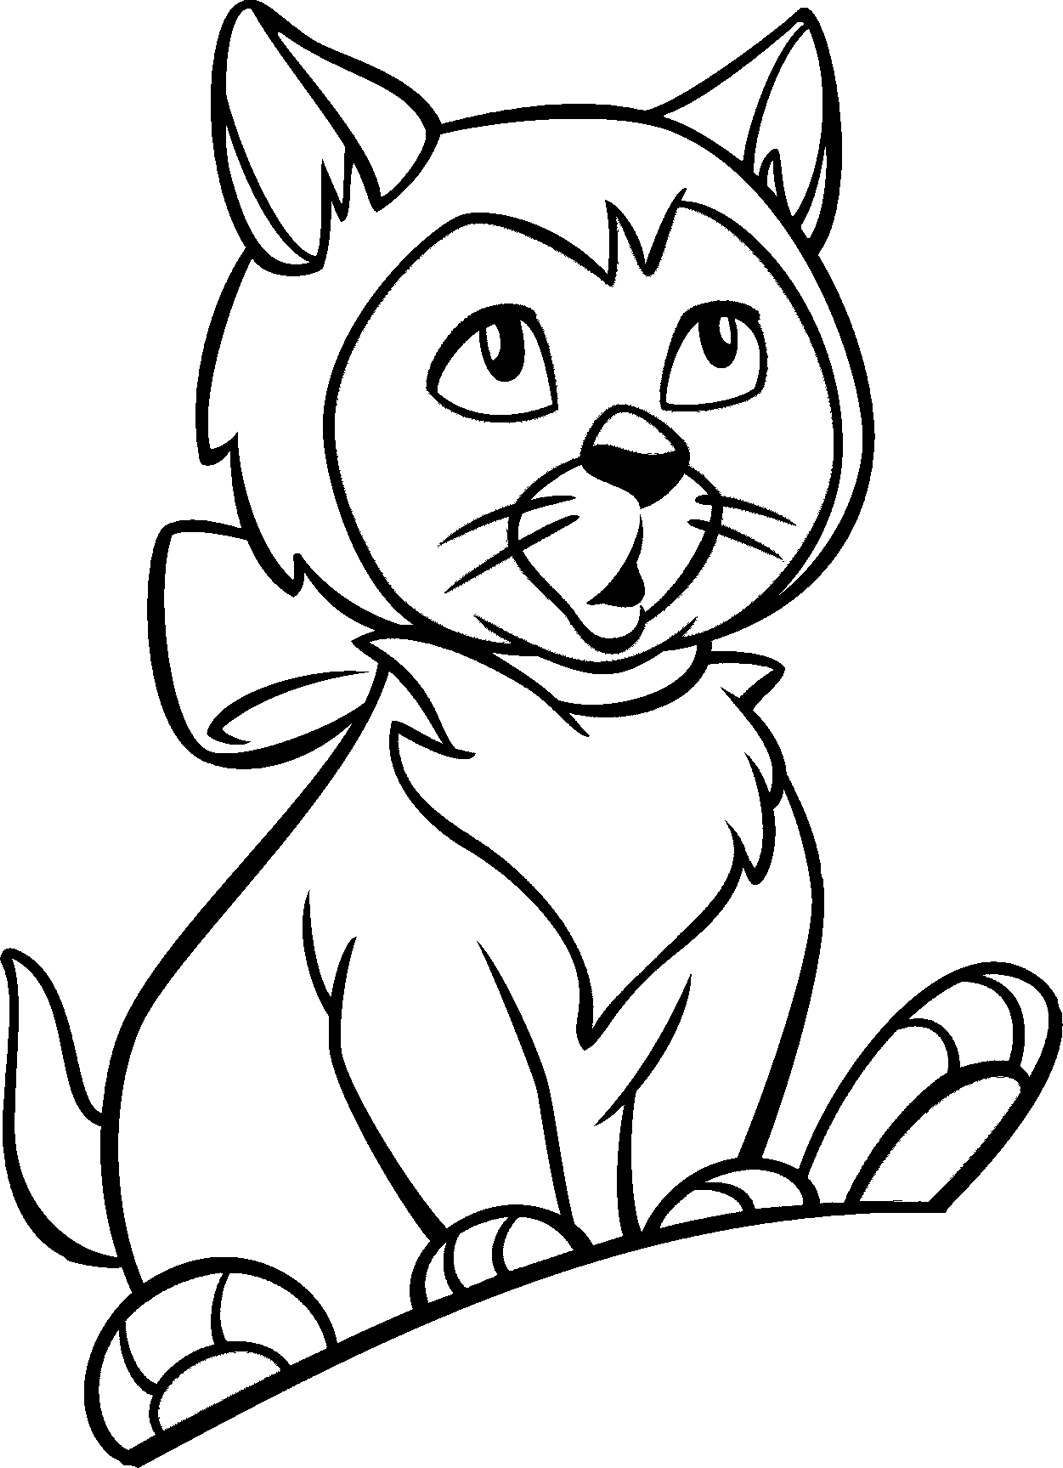 Download Coloring Pages for Kids: Cat Coloring Pages for Kids